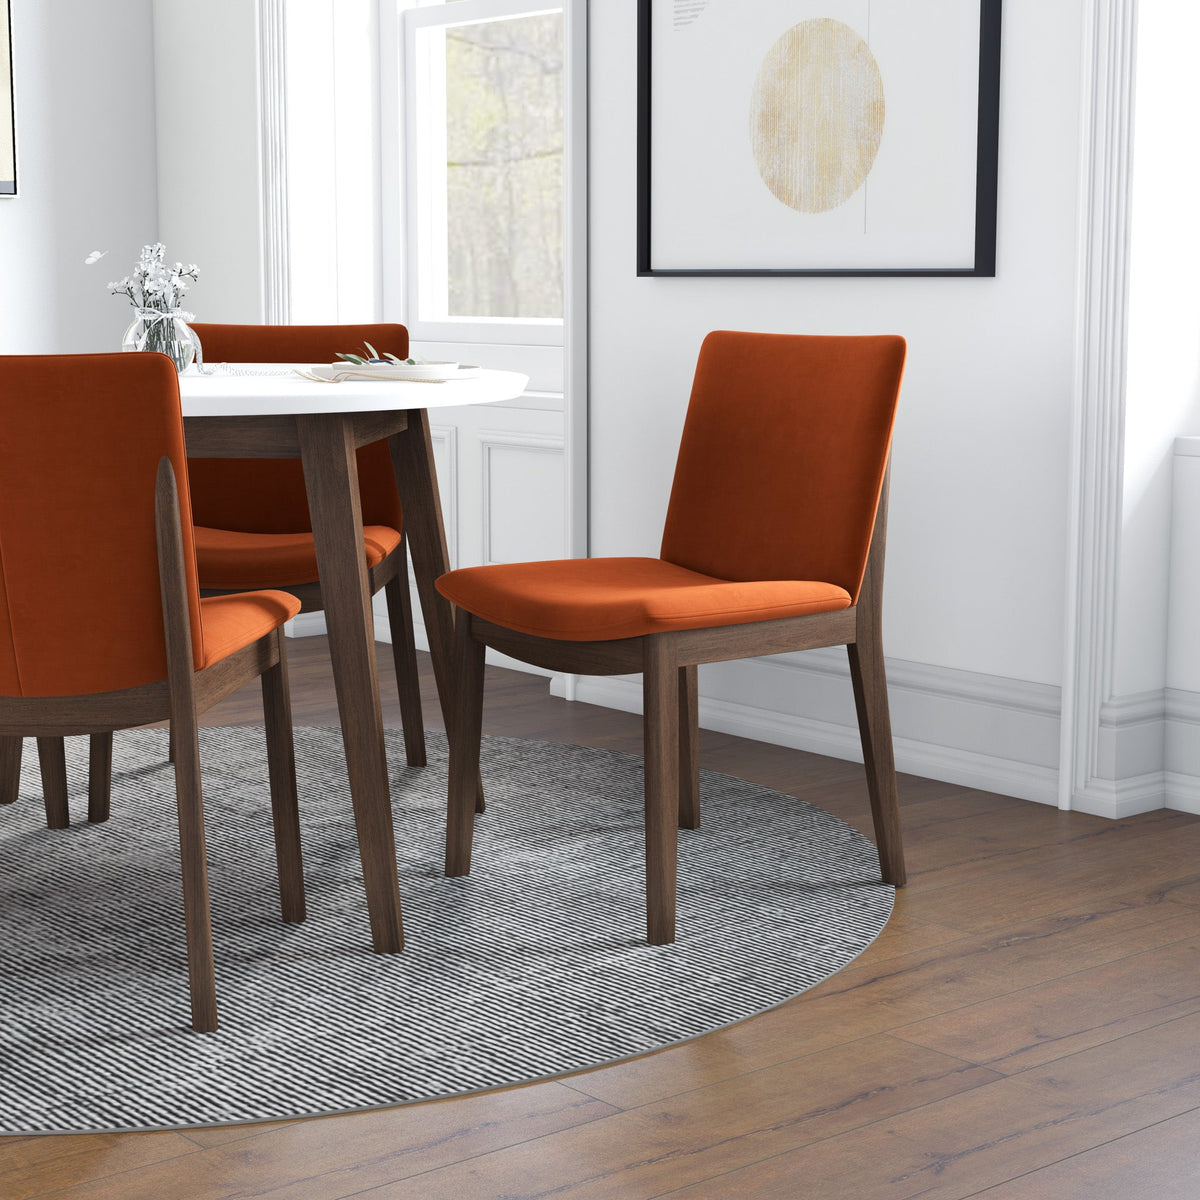 Dining Set Palmer White Top Table with 4 Virginia Burnt Orange Velvet Chairs | Mid in Mod | Houston TX | Best Furniture stores in Houston